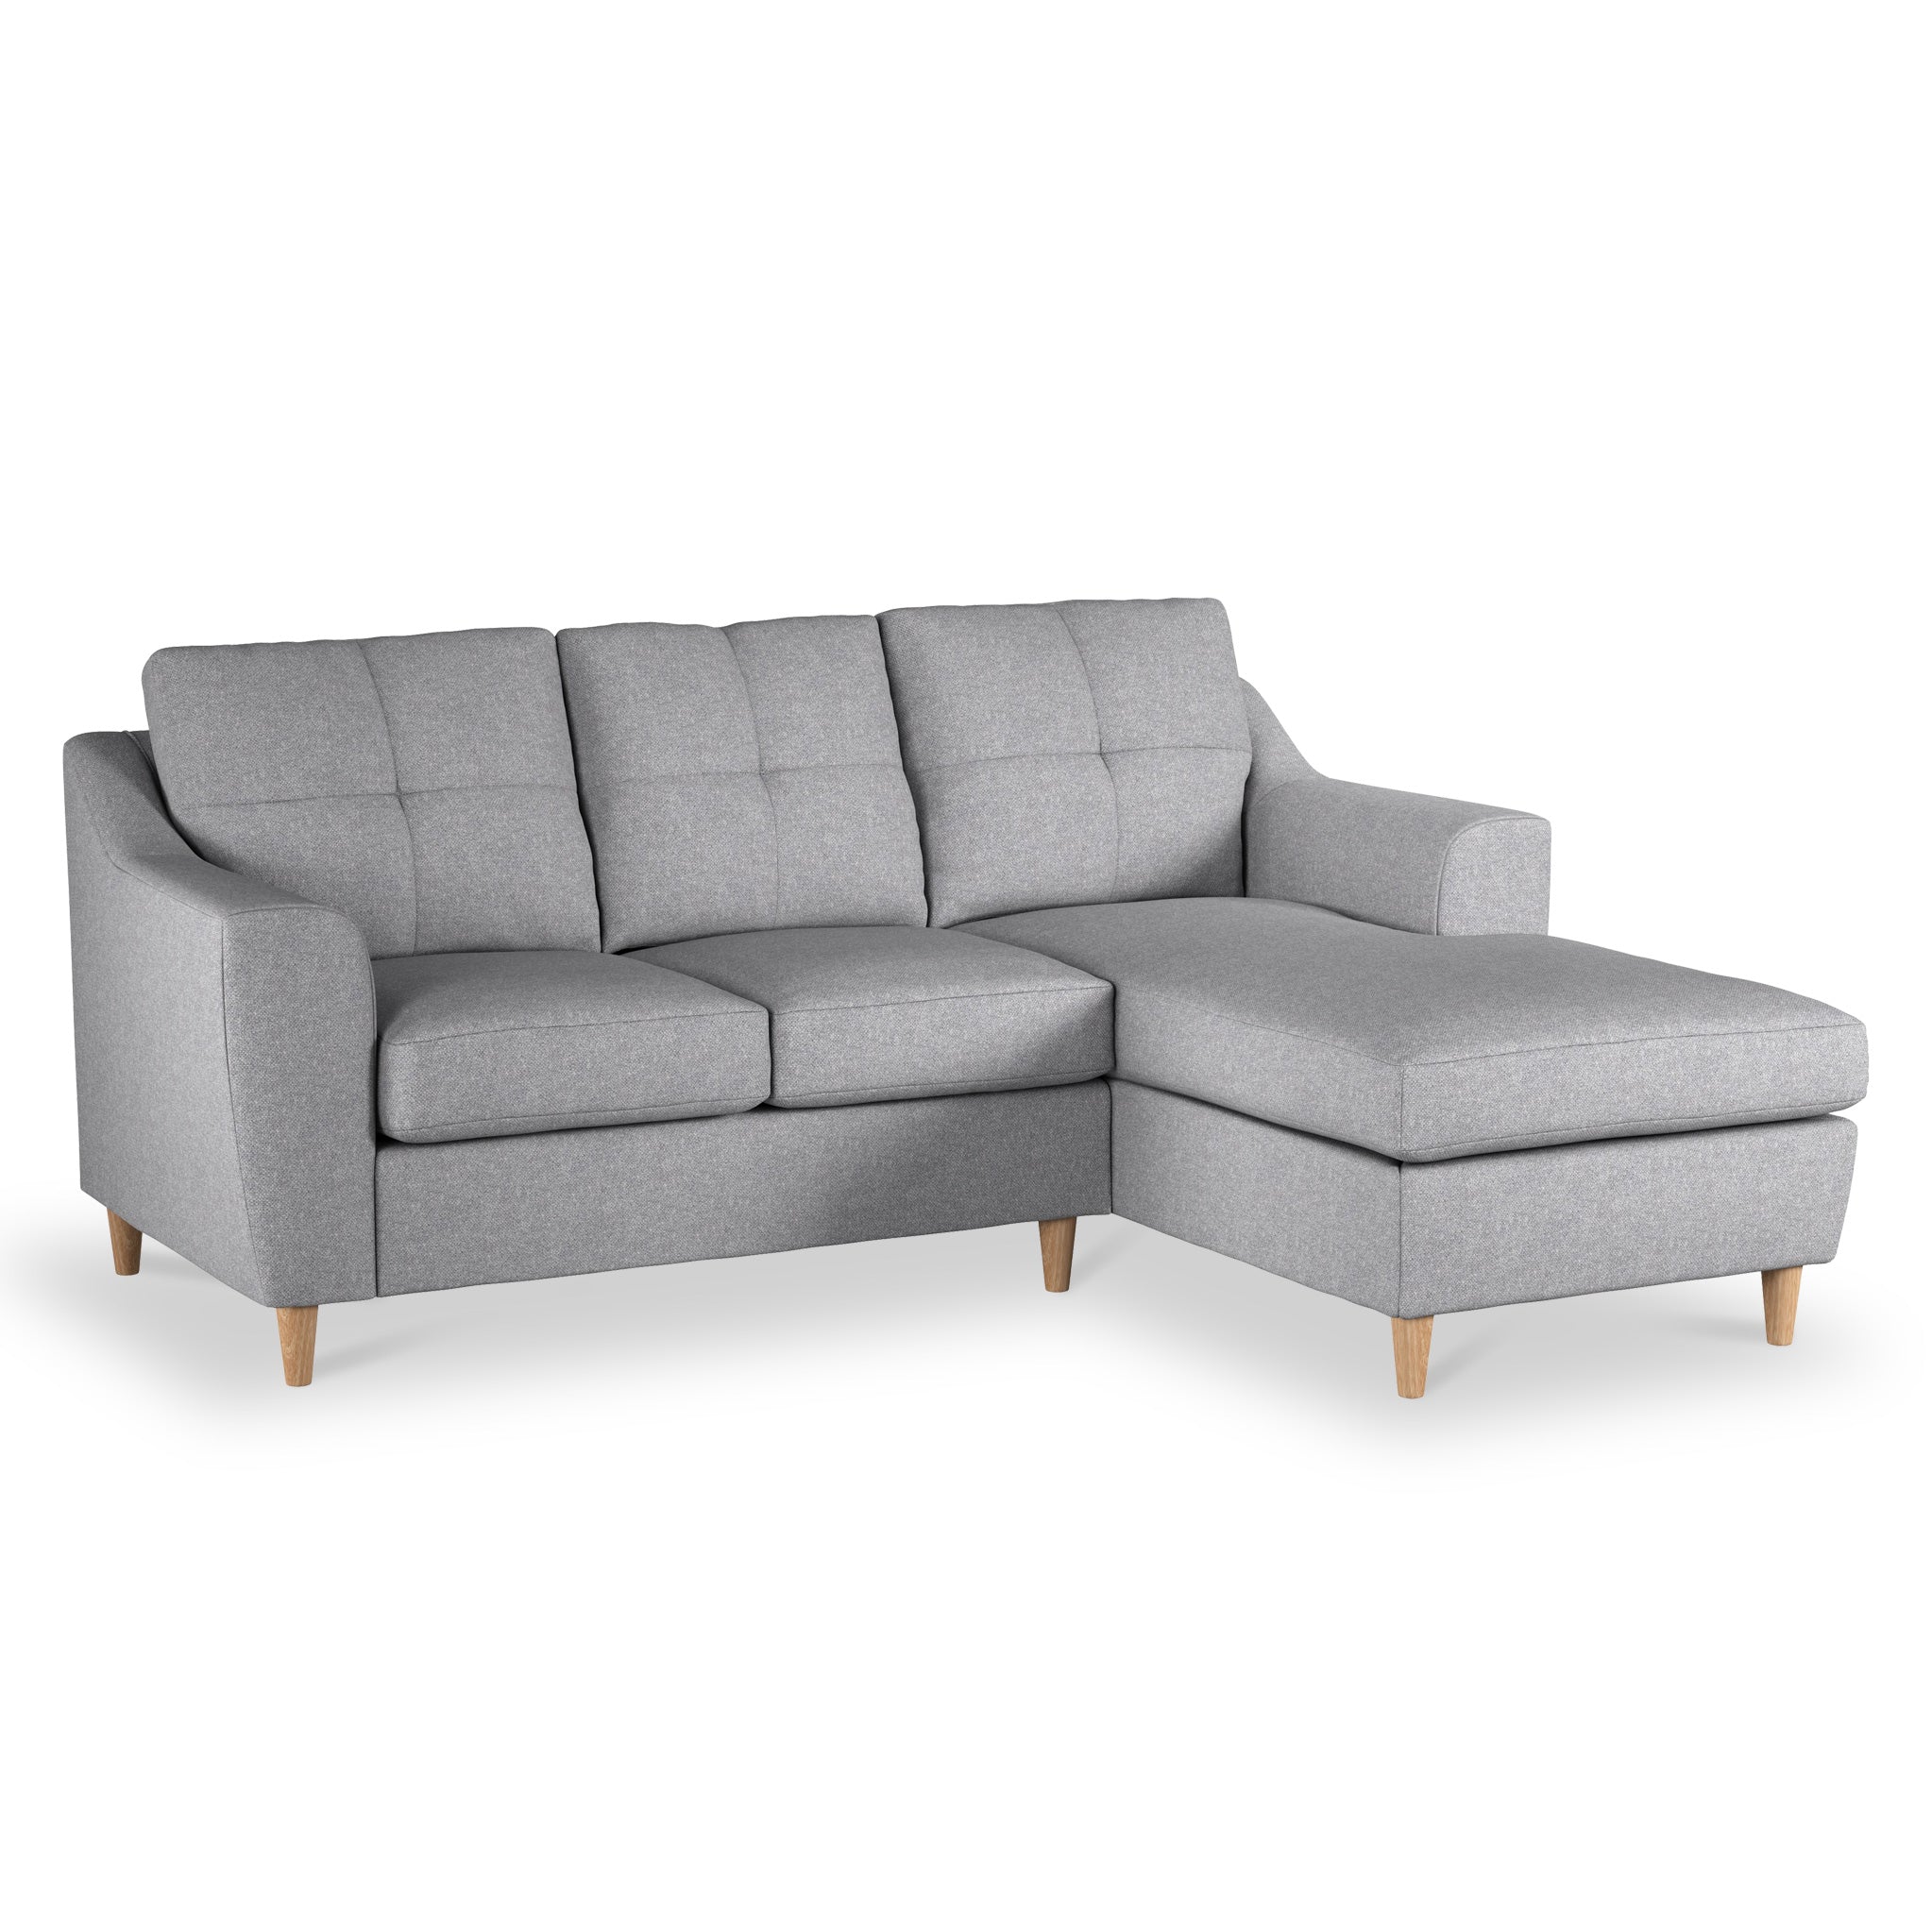 Justin 3 Seater Chaise Sofa Traditional Tufted Couch Roseland